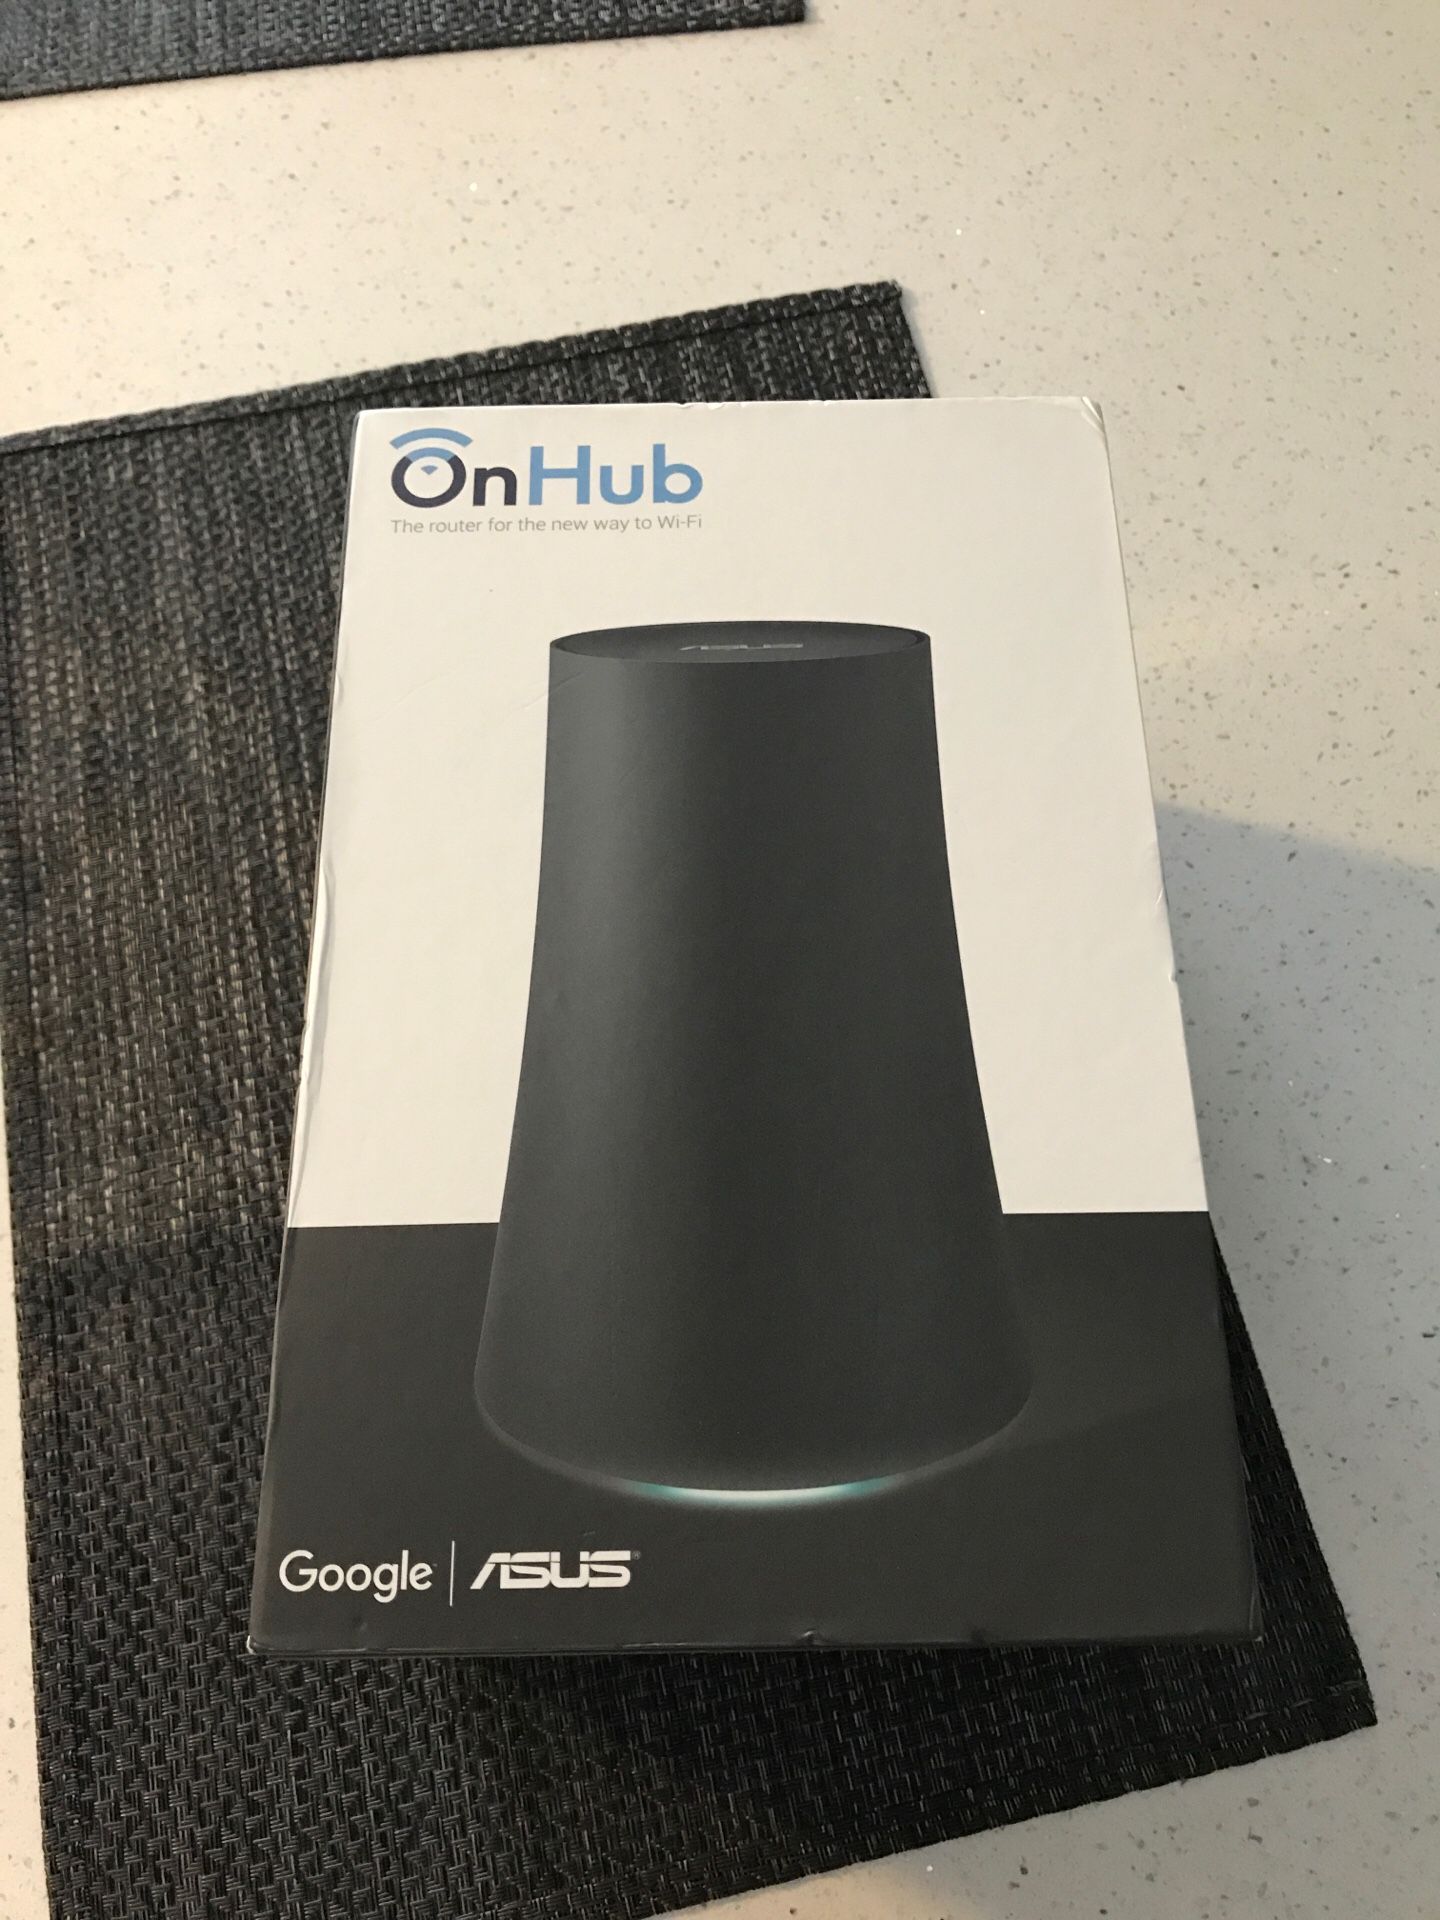 Asus on hub google router